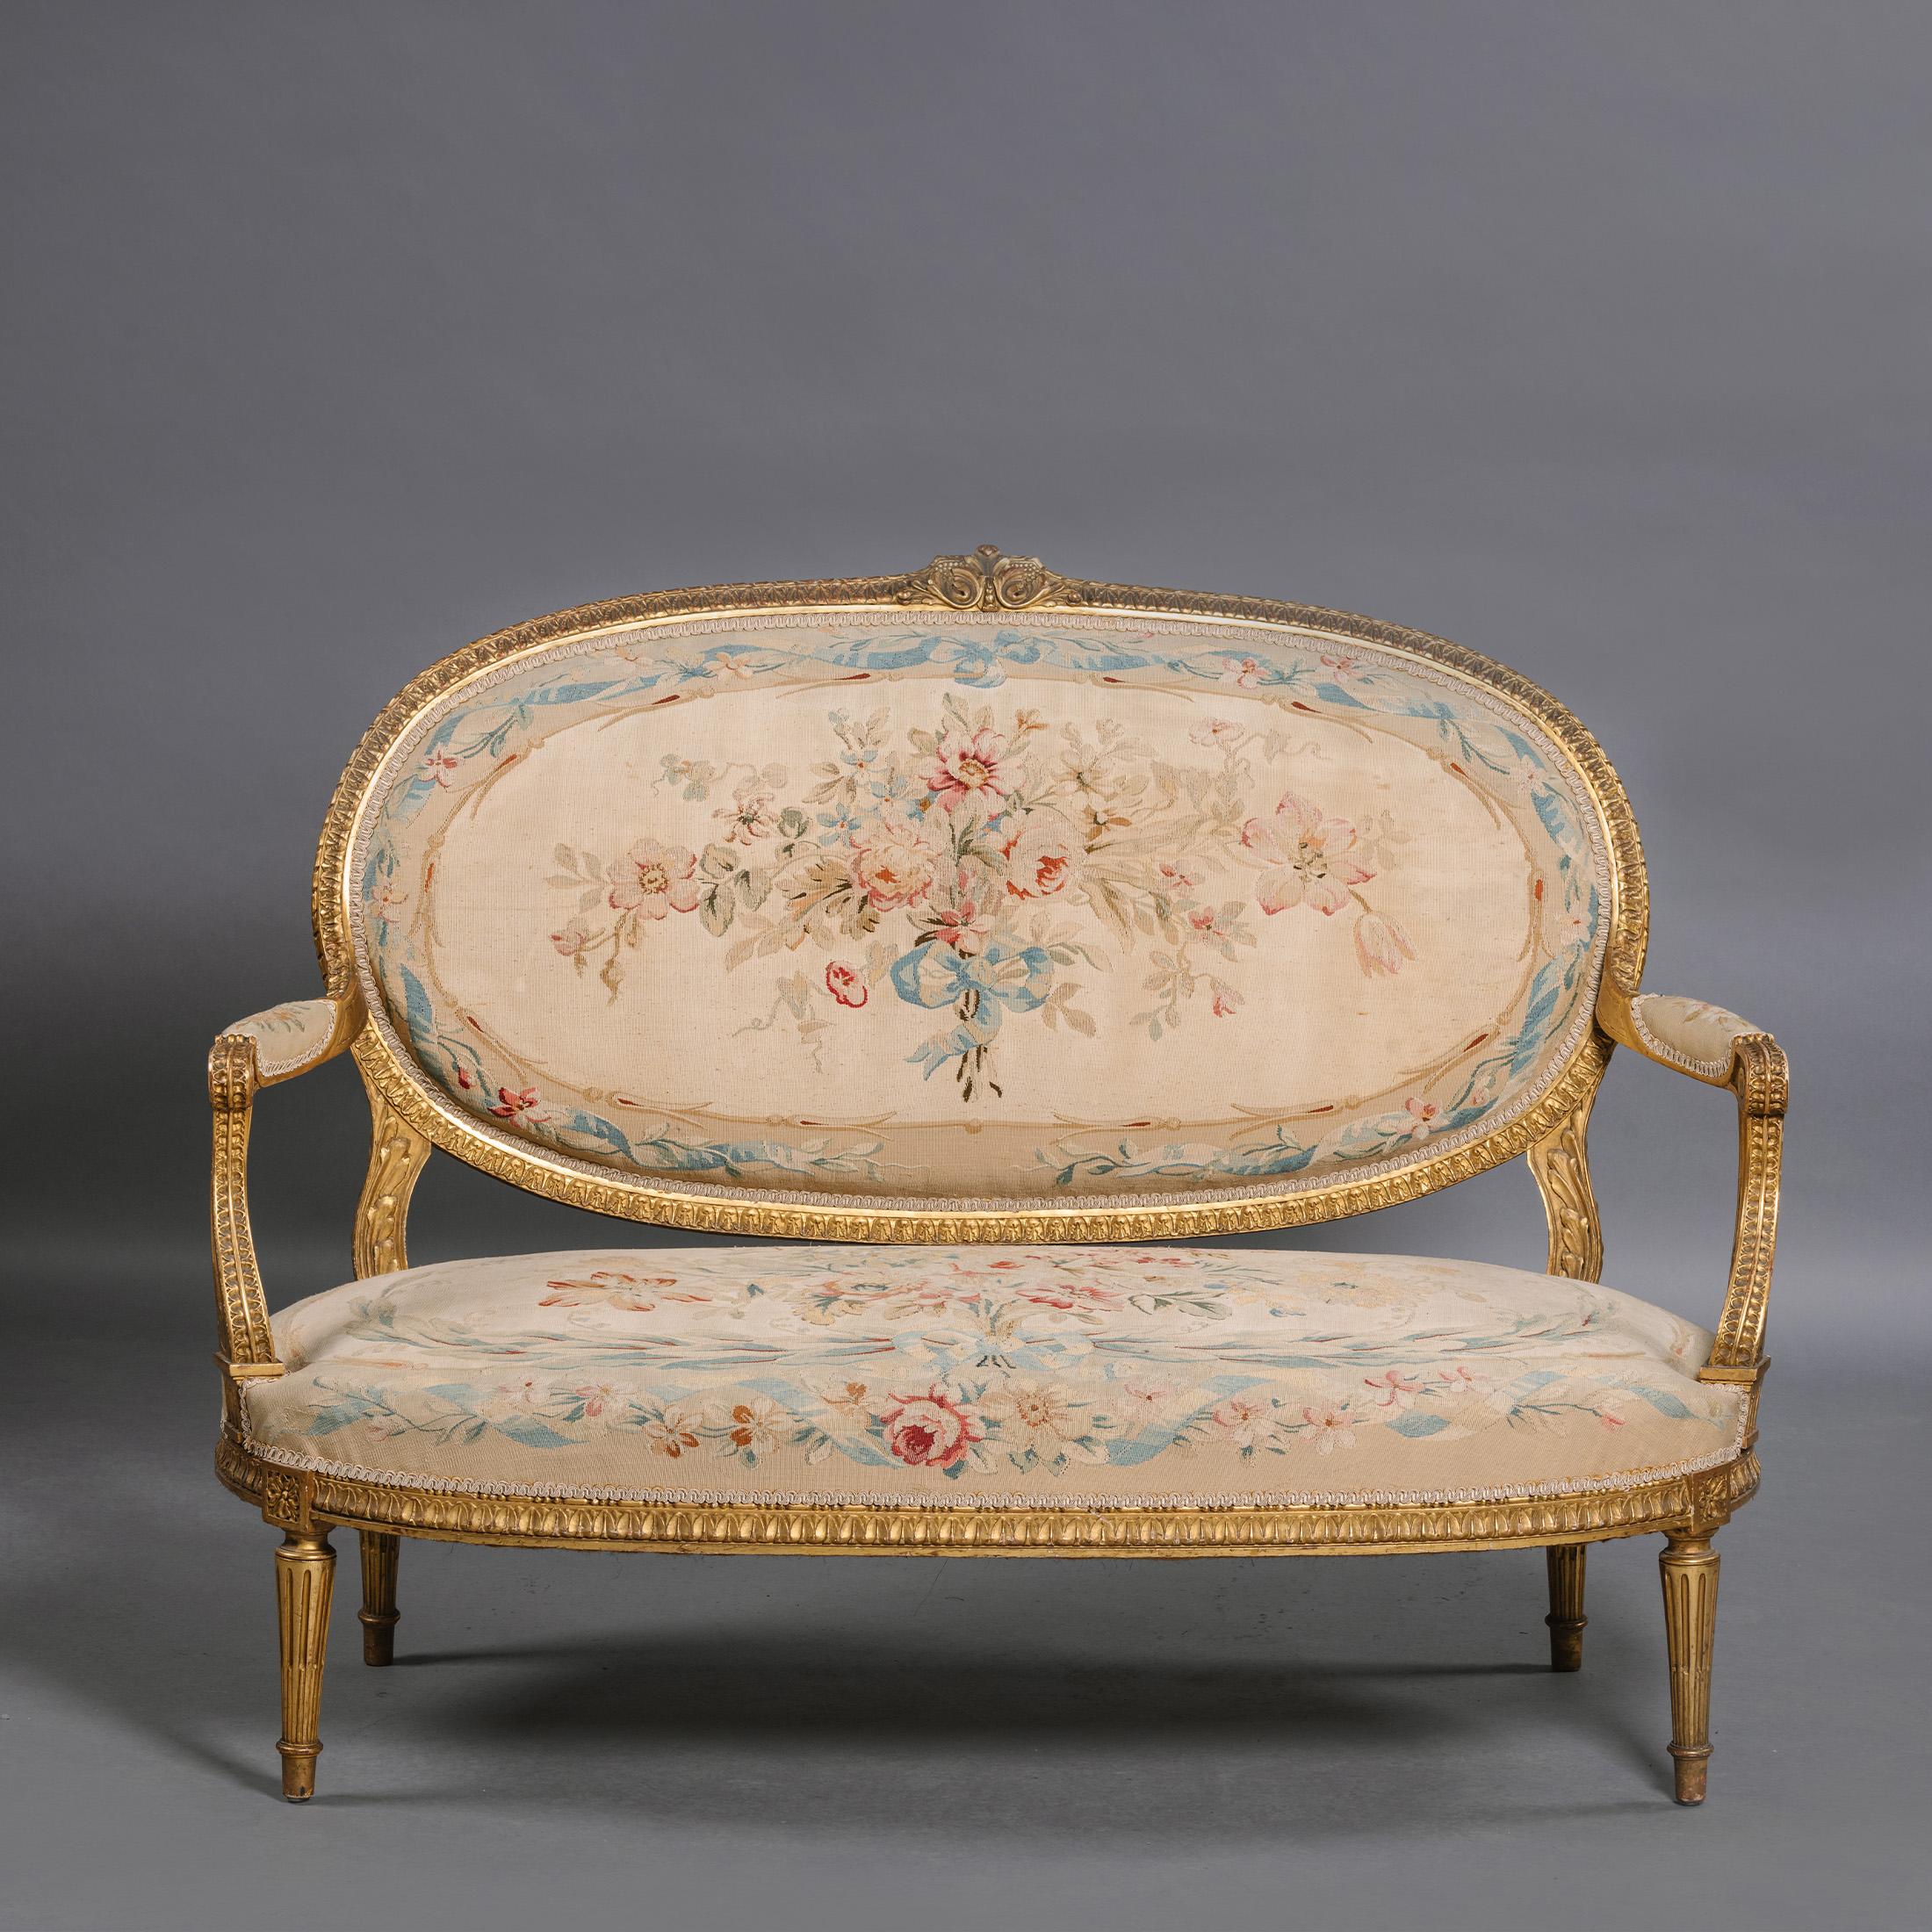 A Louis XVI Style Giltwood and Aubusson Tapestry Five-Piece Salon Suite.

This suite of seat furniture comprises four fauteuils or open armchairs of generous proportions and a canapé or sofa, en suite. Each has a giltwood frame carved with leaf